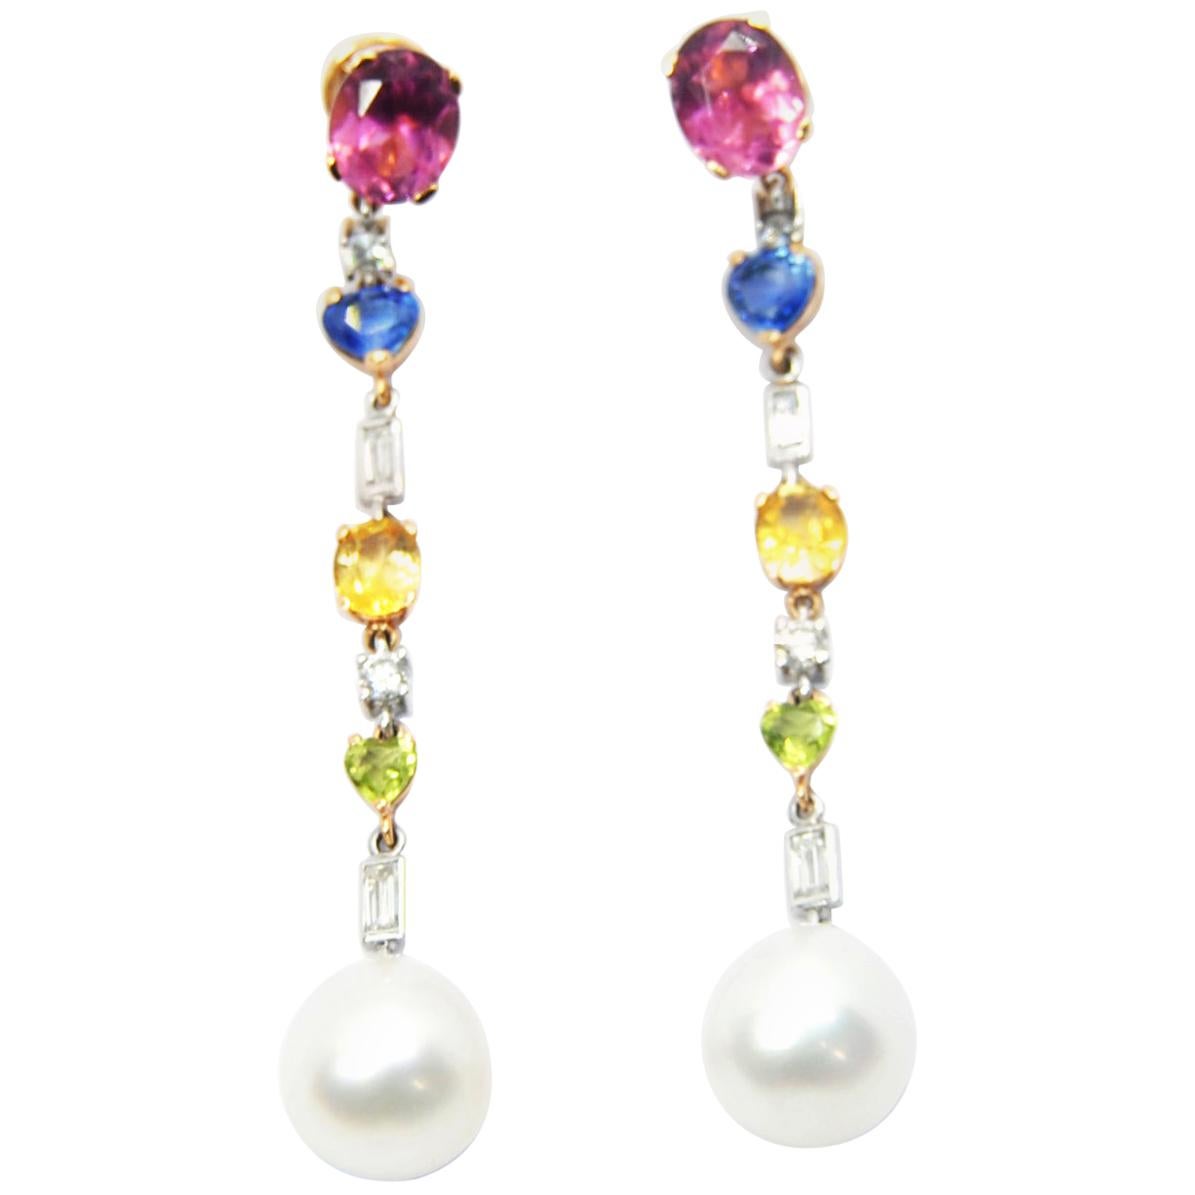 Chandelier Souths Sea Pearl Earrings in 18kt Gold Diamonds and Precious Gems For Sale